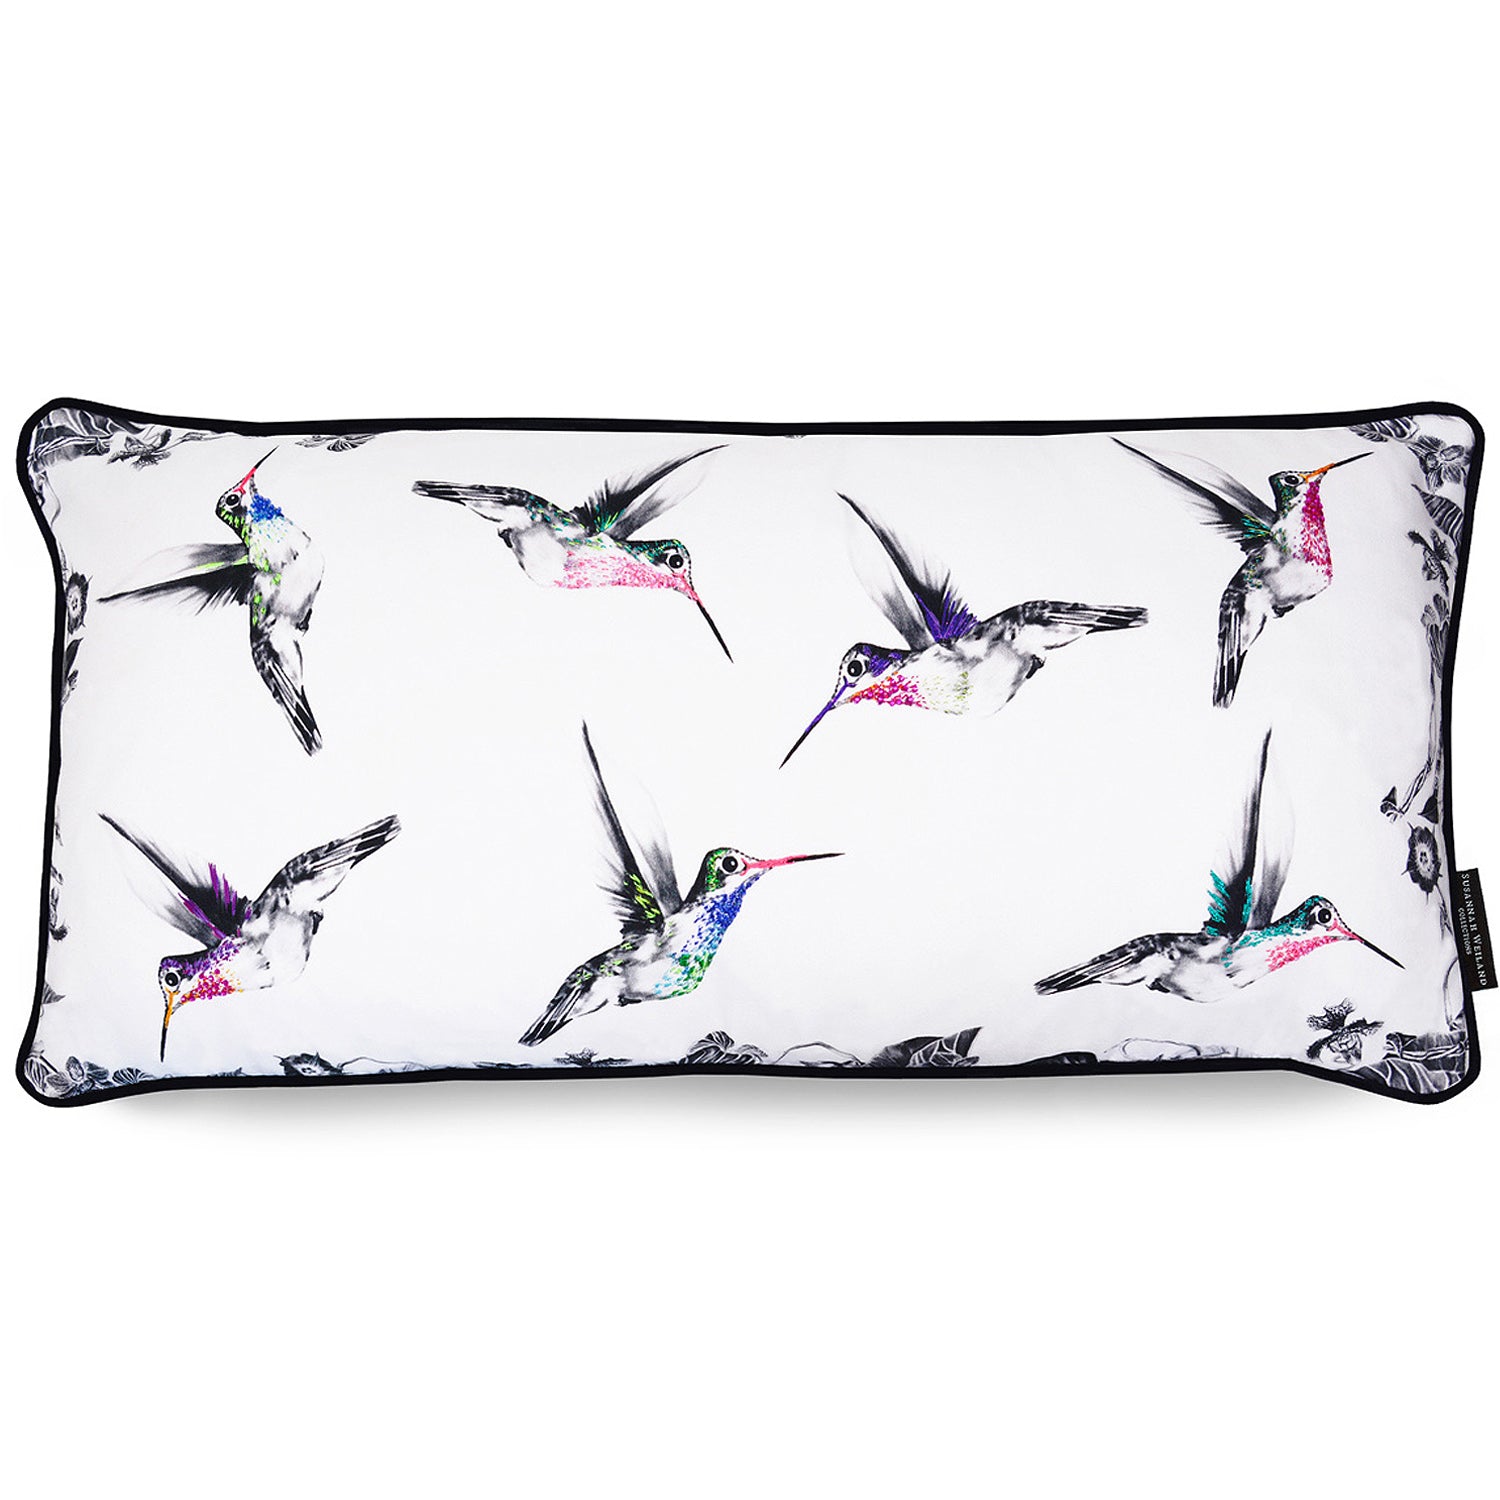 Bolster cushion with hand embroidered hummingbirds